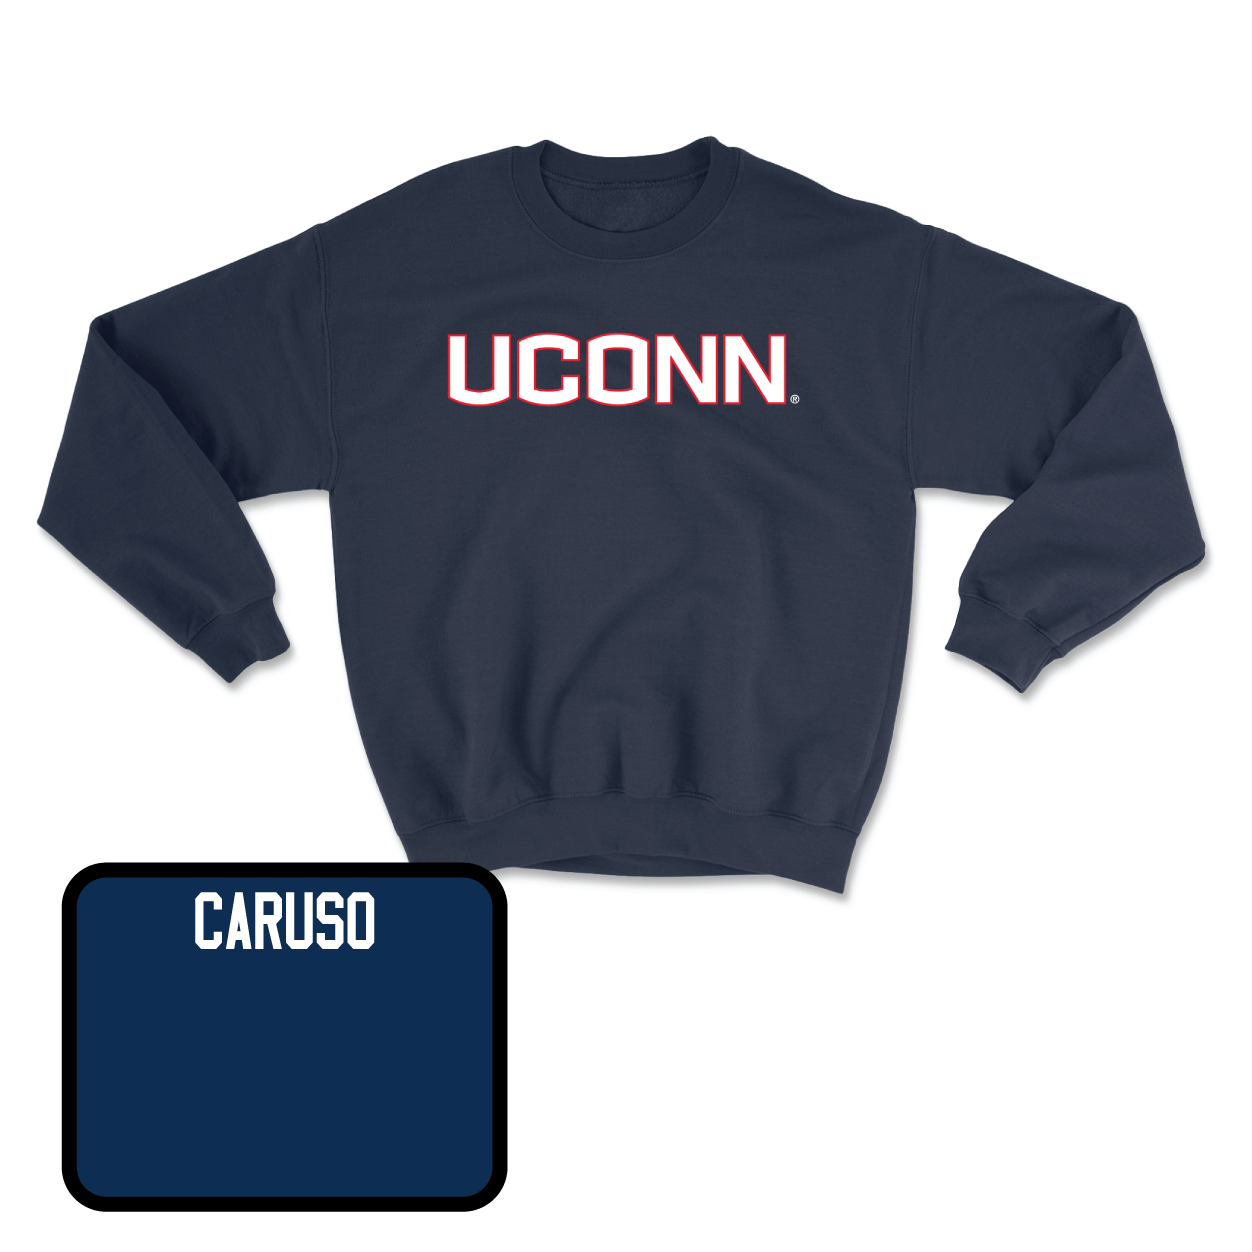 Navy Women's Rowing UConn Crewneck Youth Large / Riley Caruso